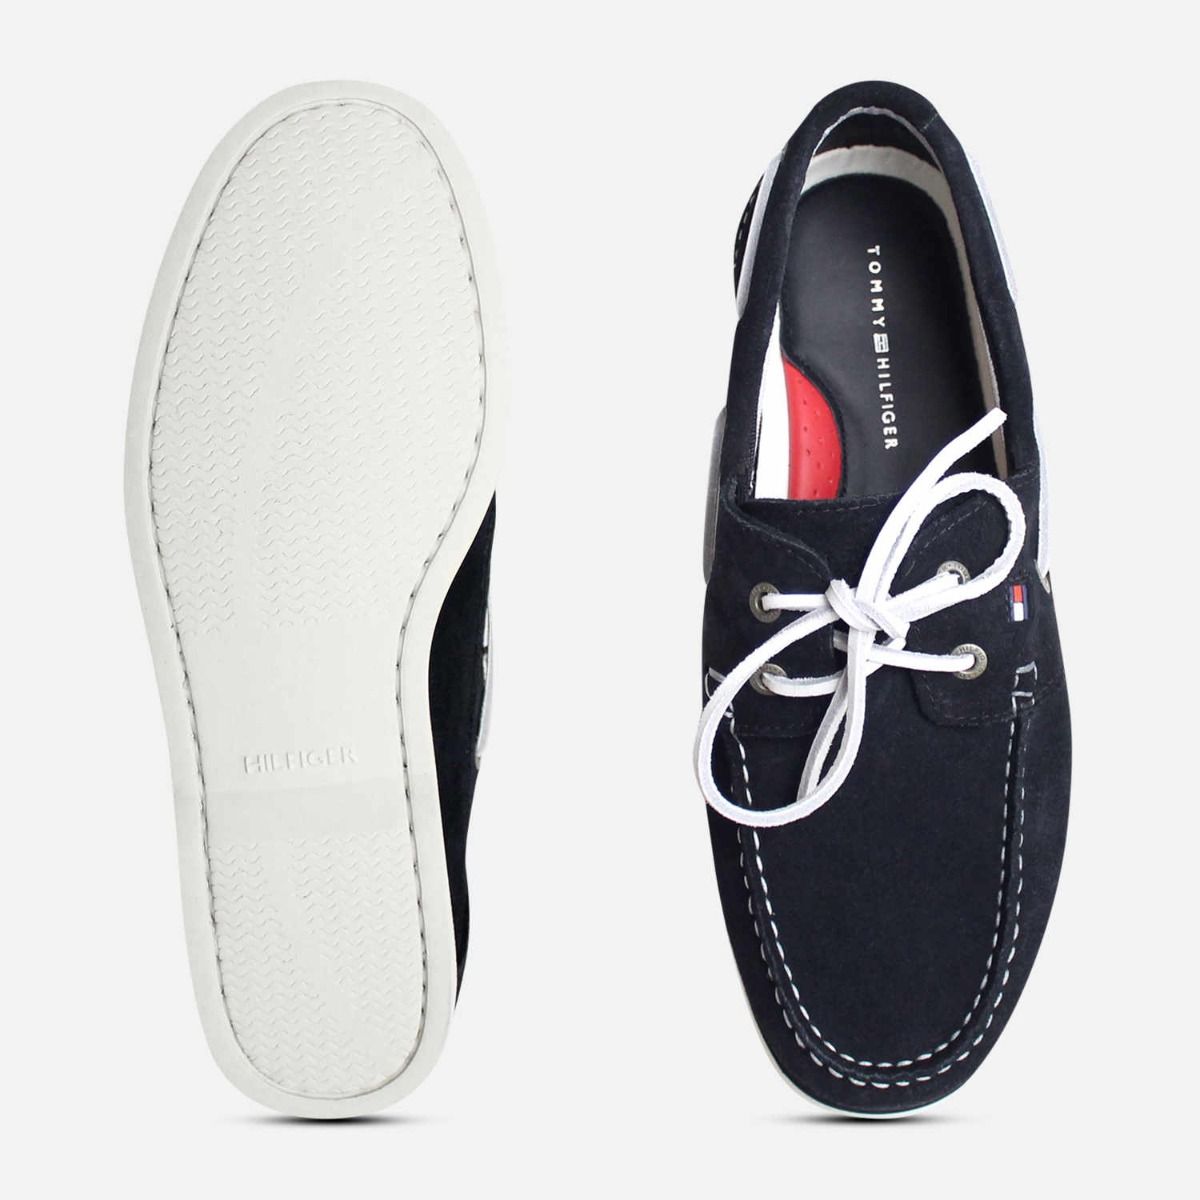 Tommy Hilfiger Classic Suede Boat Shoe in Black for Men Mens Shoes Slip-on shoes Boat and deck shoes 